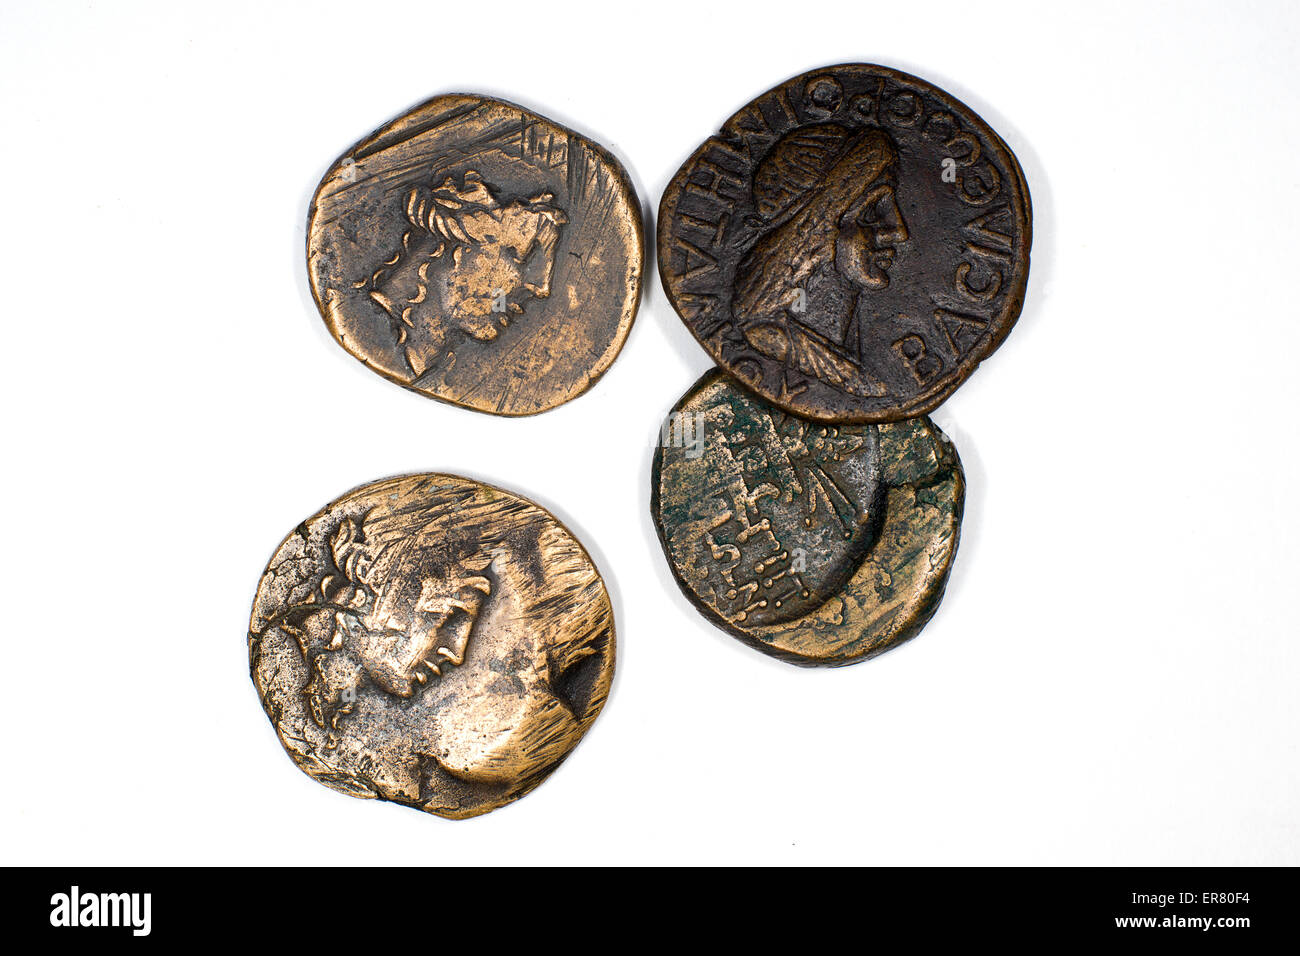 Old bronze coins with portrait of king on a white background Stock Photo